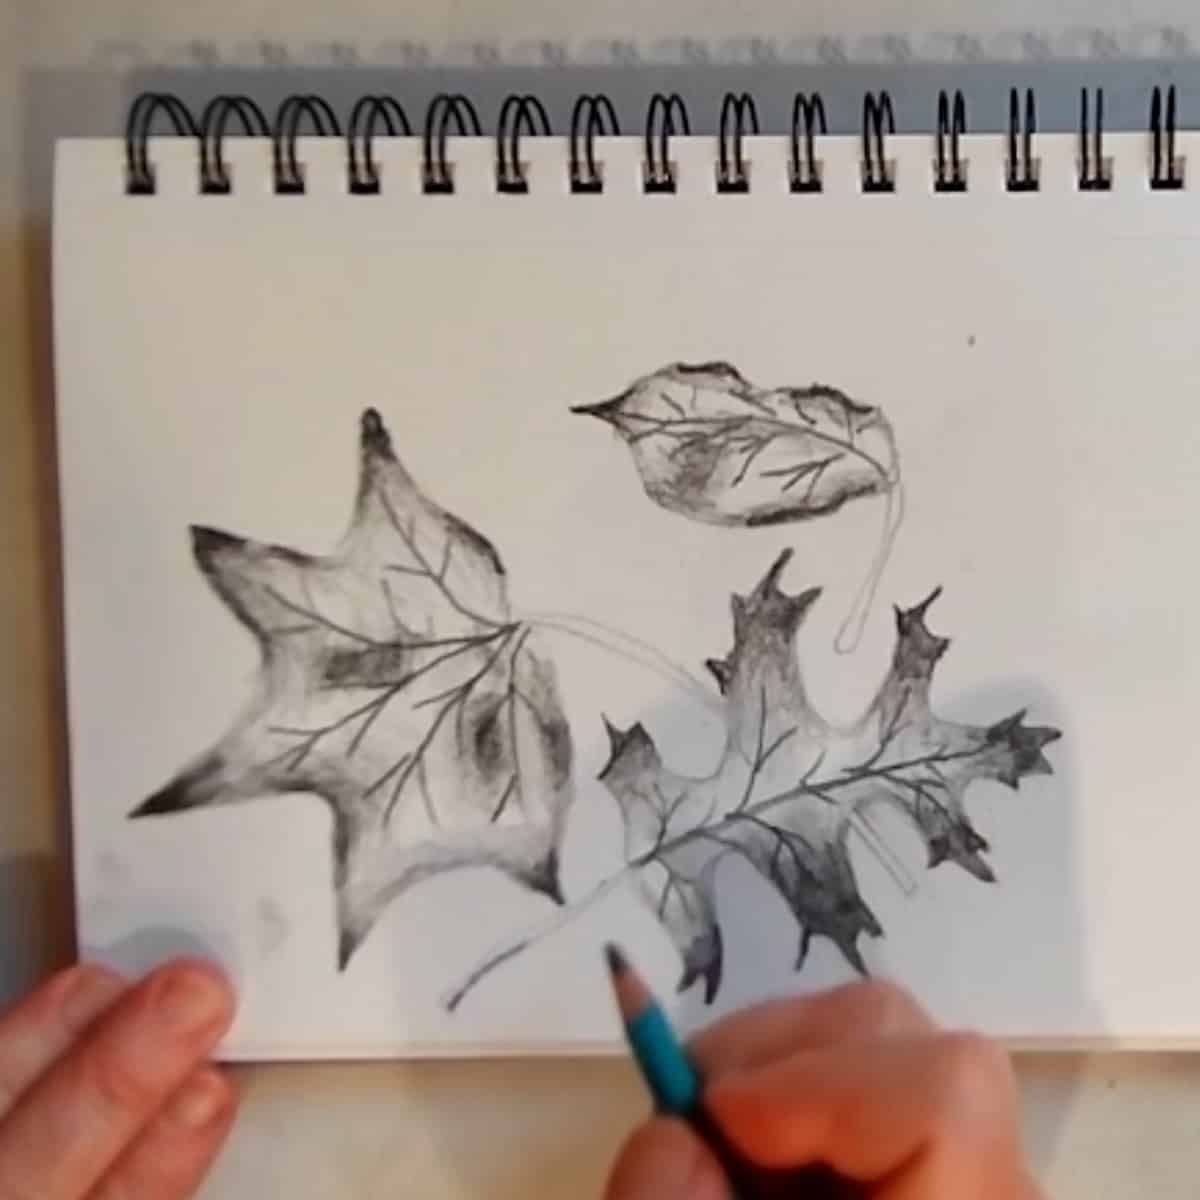 A hand is drawing in the finishing touches of a fall leaf drawing on a spiral sketchpad.